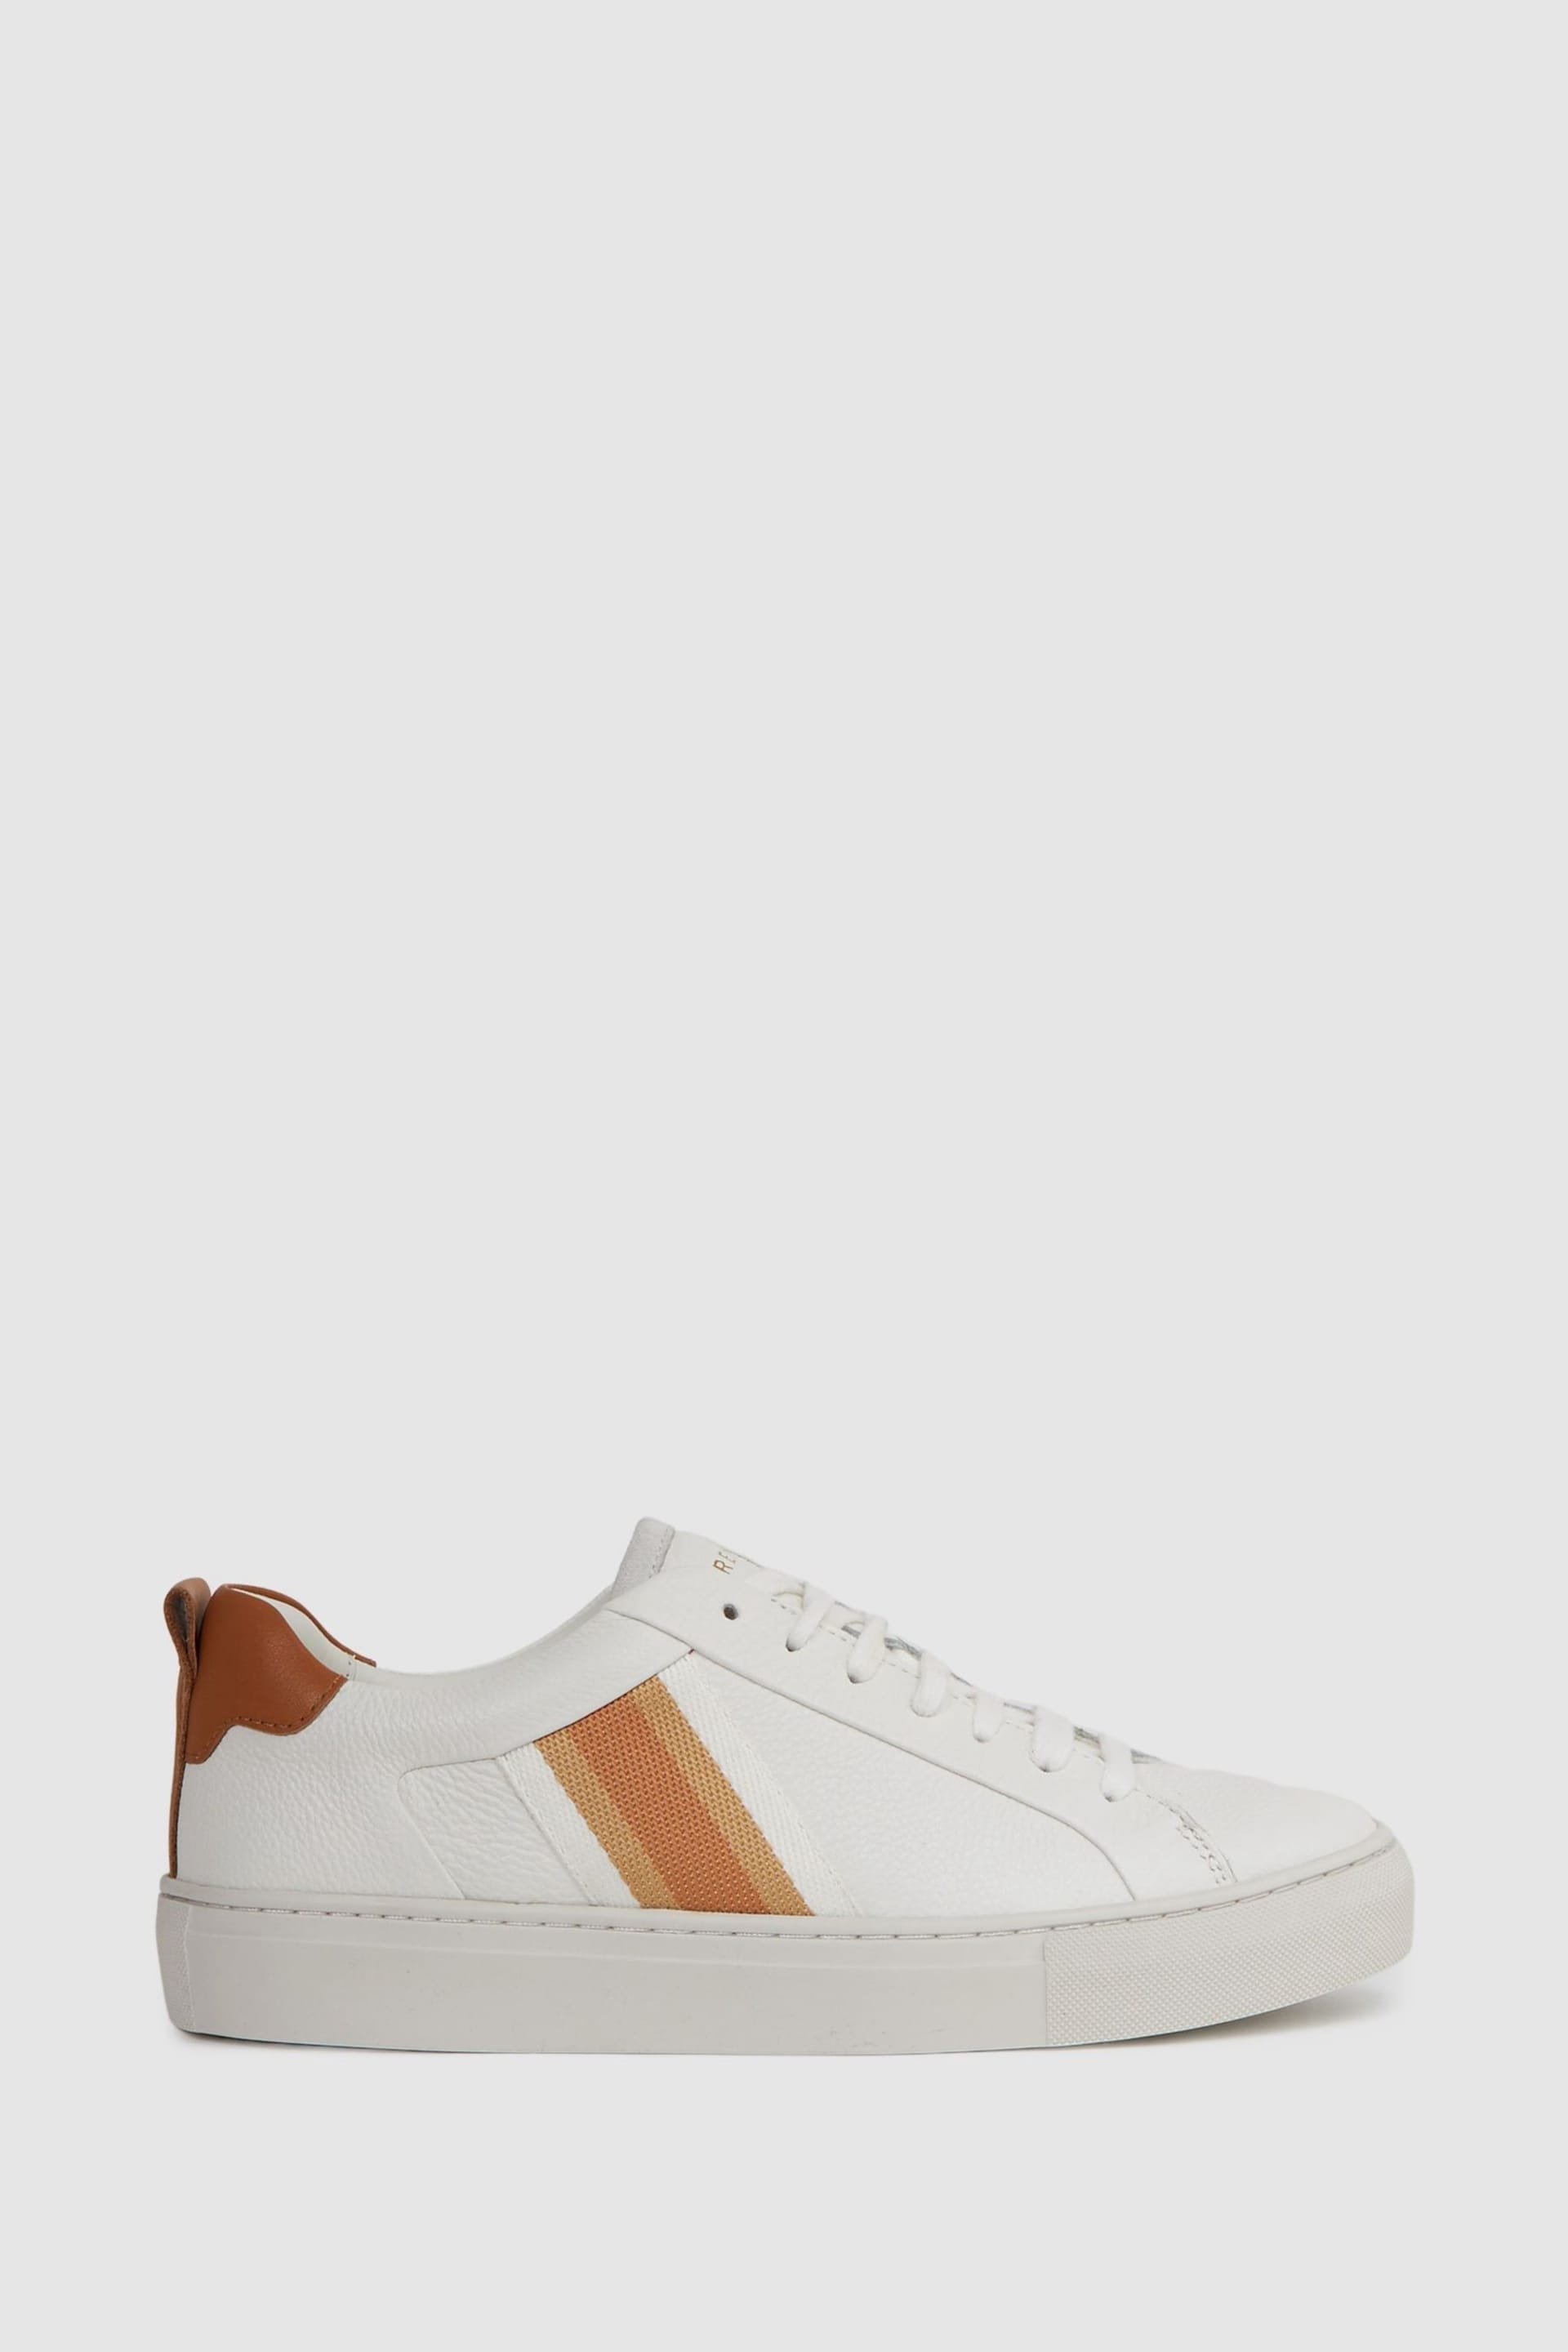 Reiss Fresh White Sonia Leather Side Stripe Trainers - Image 1 of 5